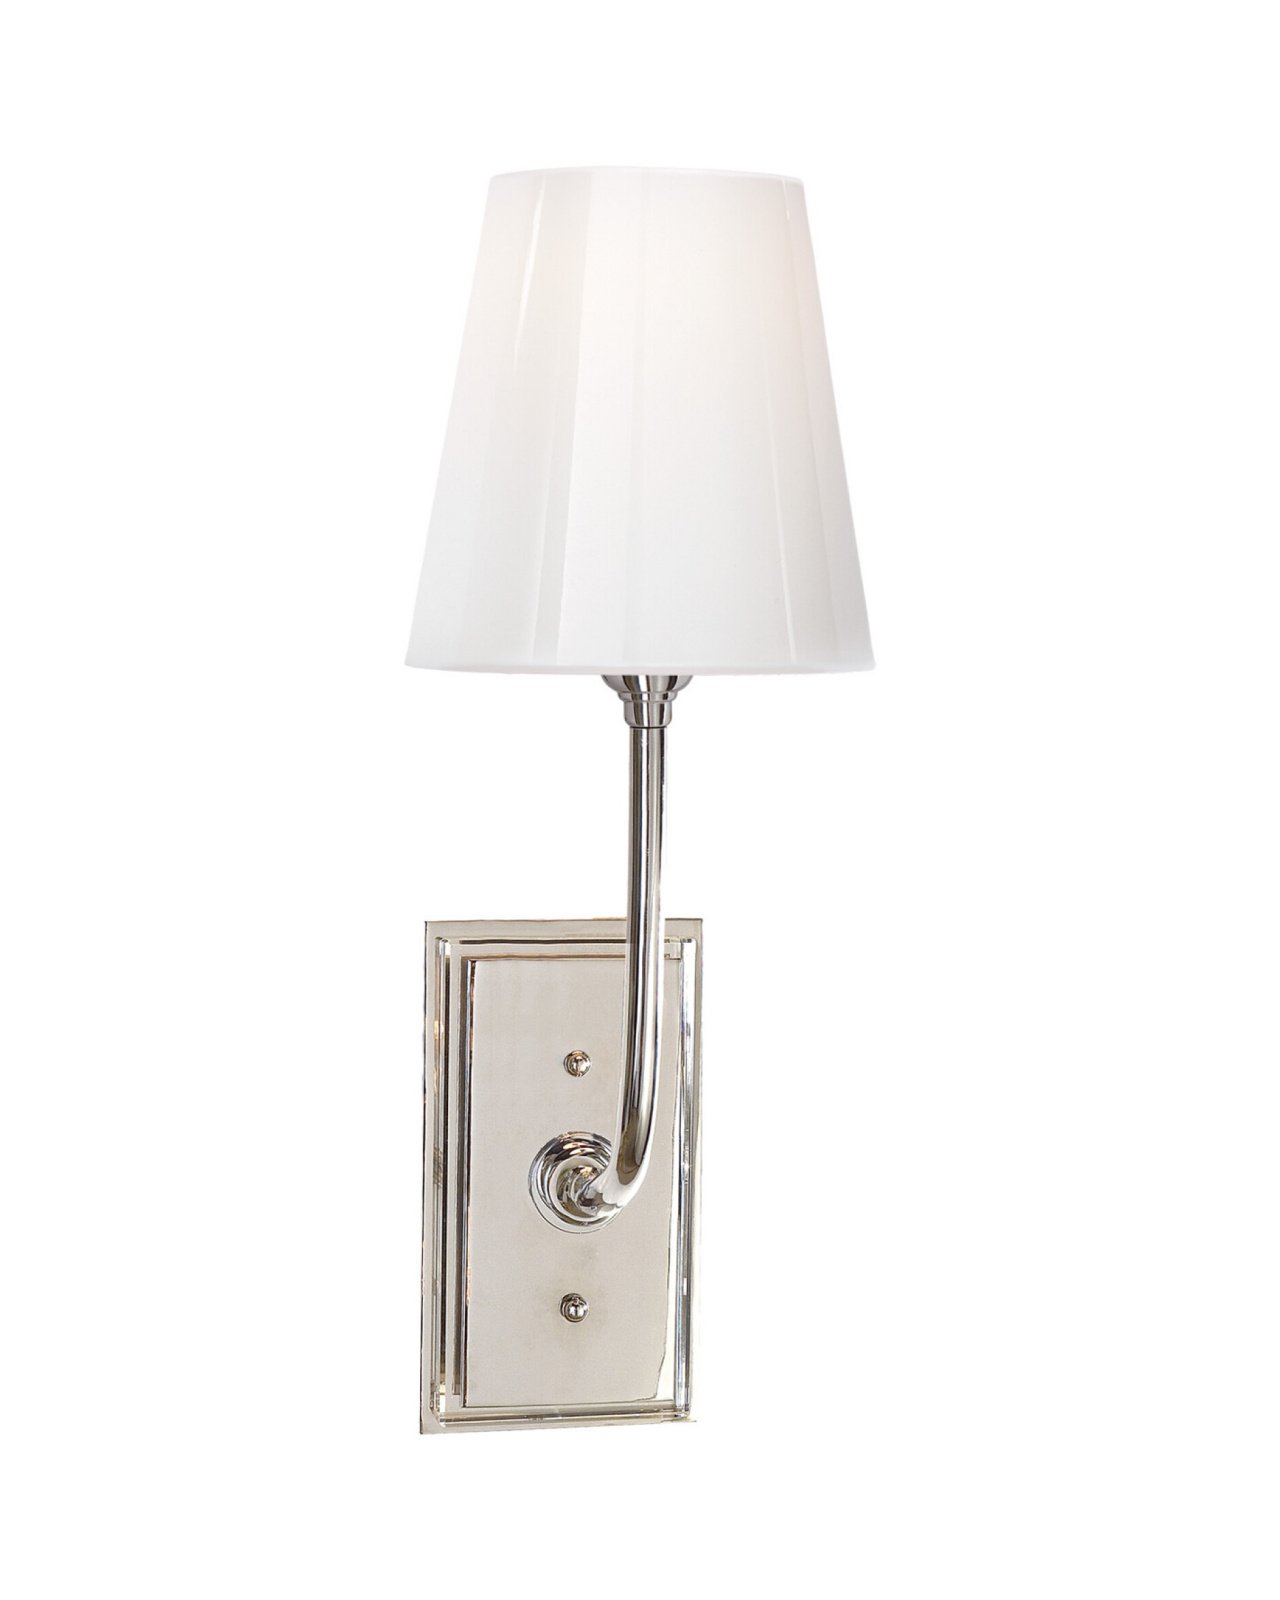 Hulton Sconce Polished Nickel with Crystal Backplate and White Glass Shade